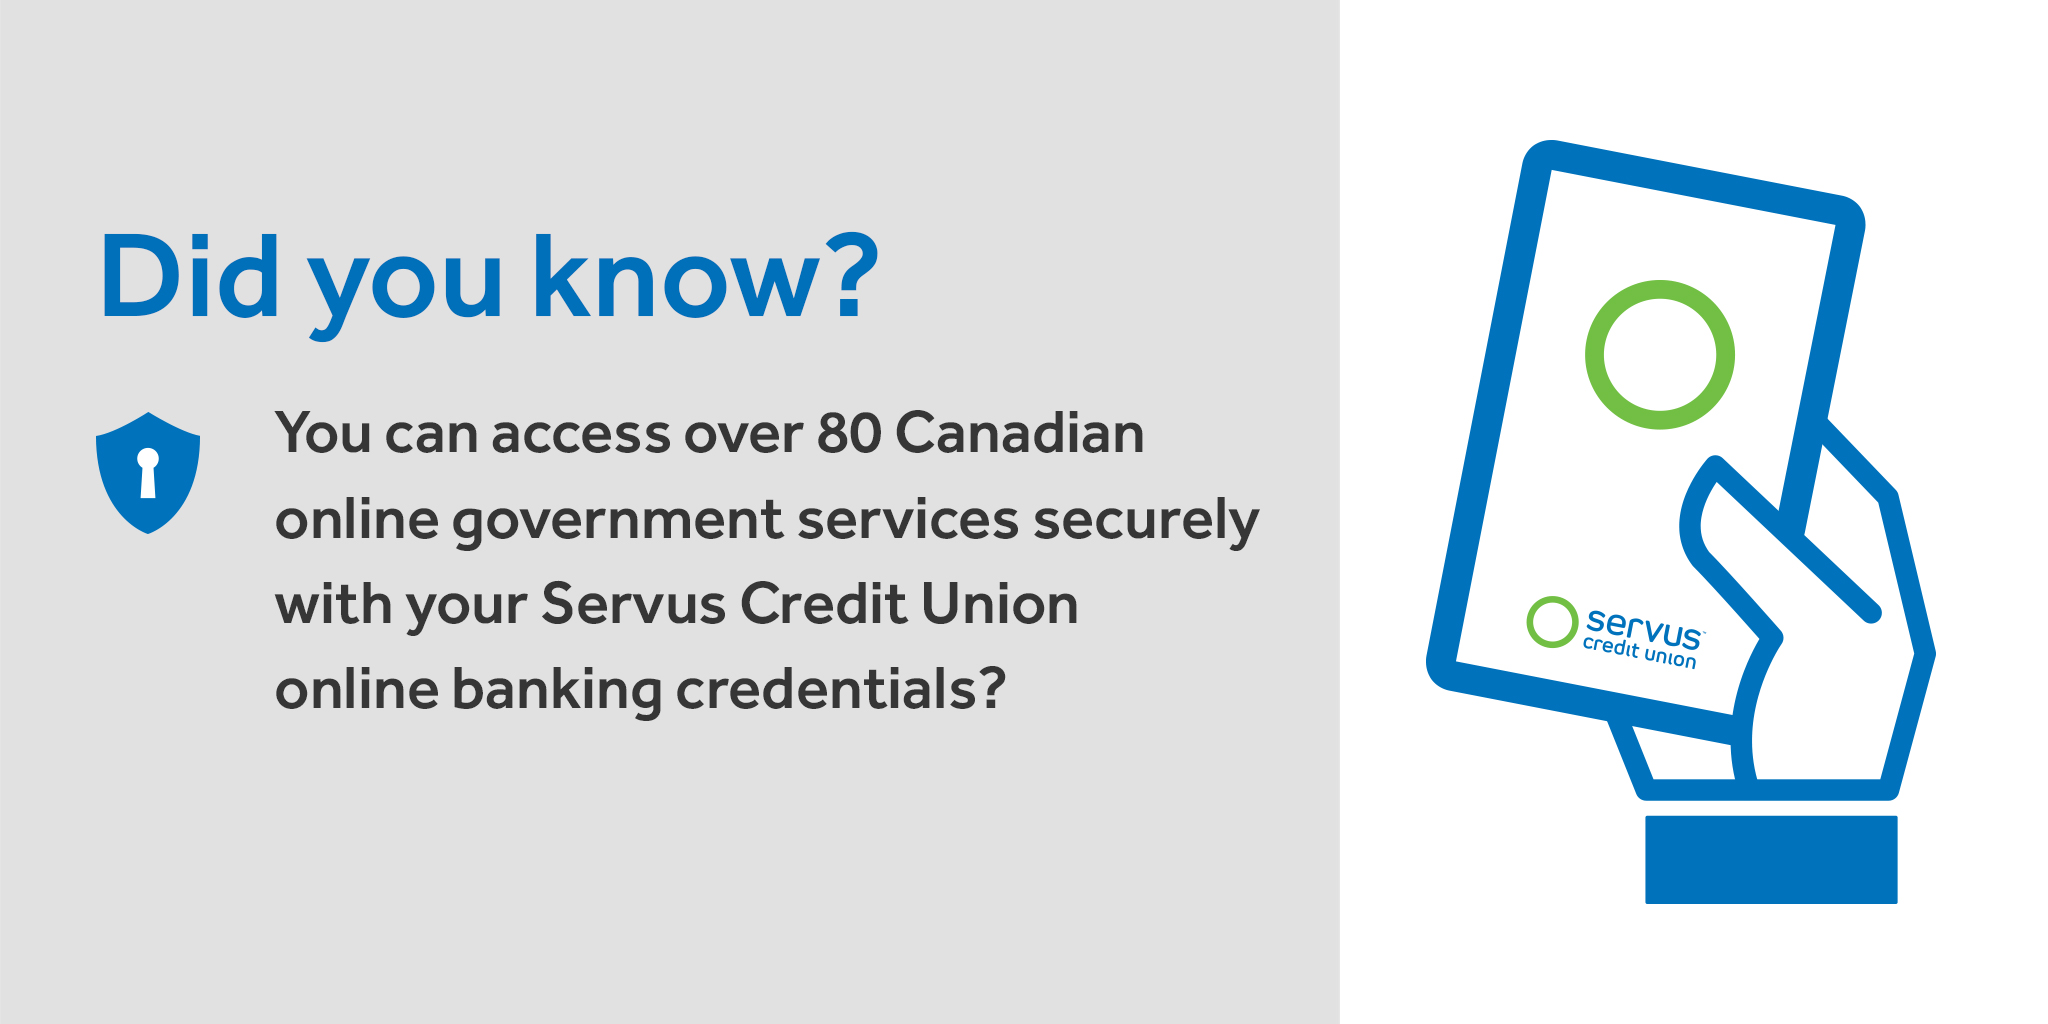 Message on the left: Did you know? You can access over 80 Canadian online government services securely with your Servus Credit Union online banking credentials? Image on the right: an illustrated hand holding a mobile phone.